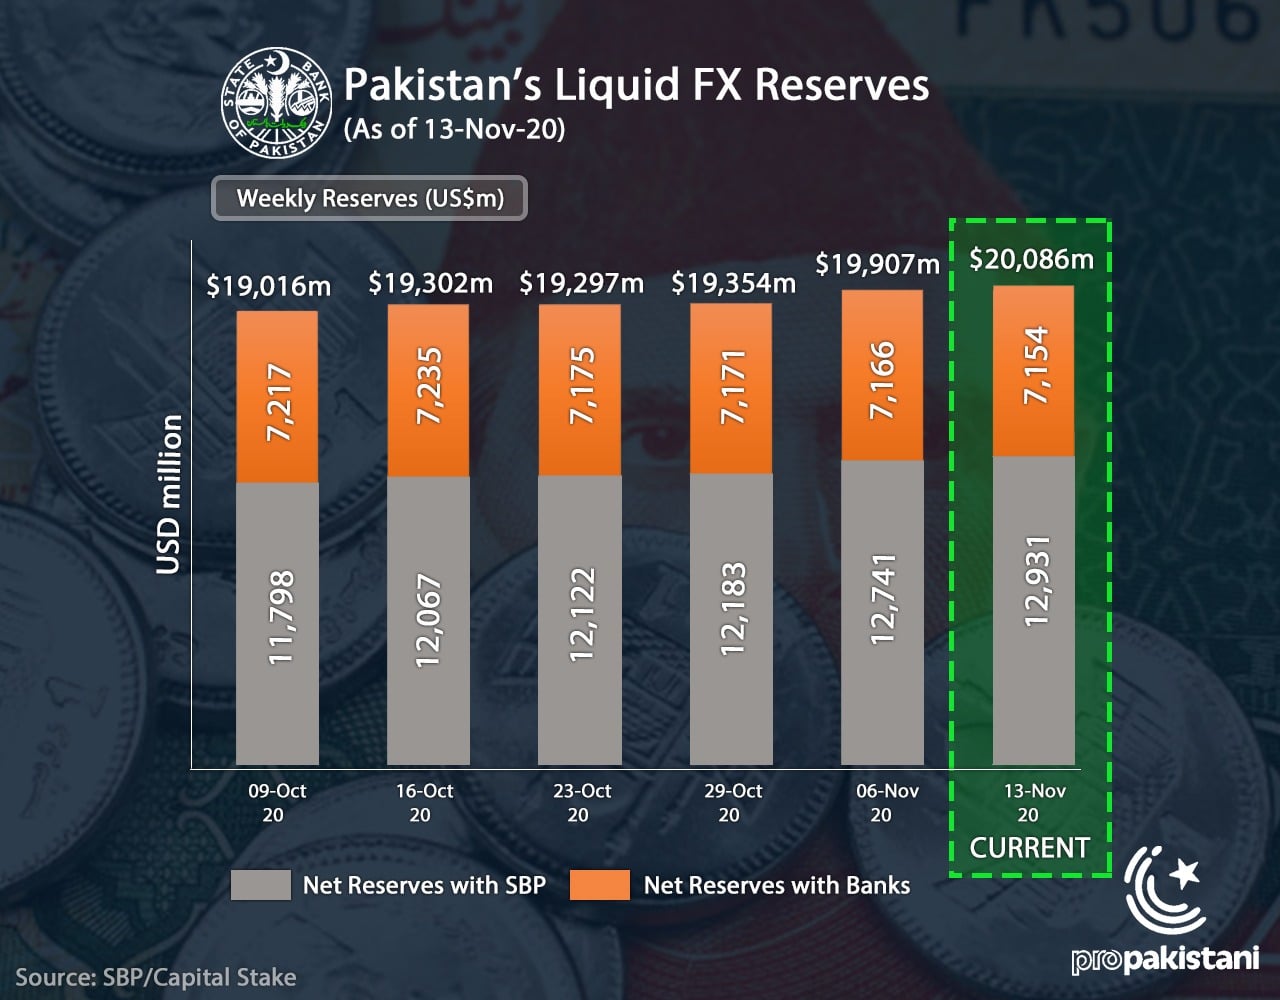 Pakistan’s Foreign Reserves Reach $20 Billion After Almost 3 Years